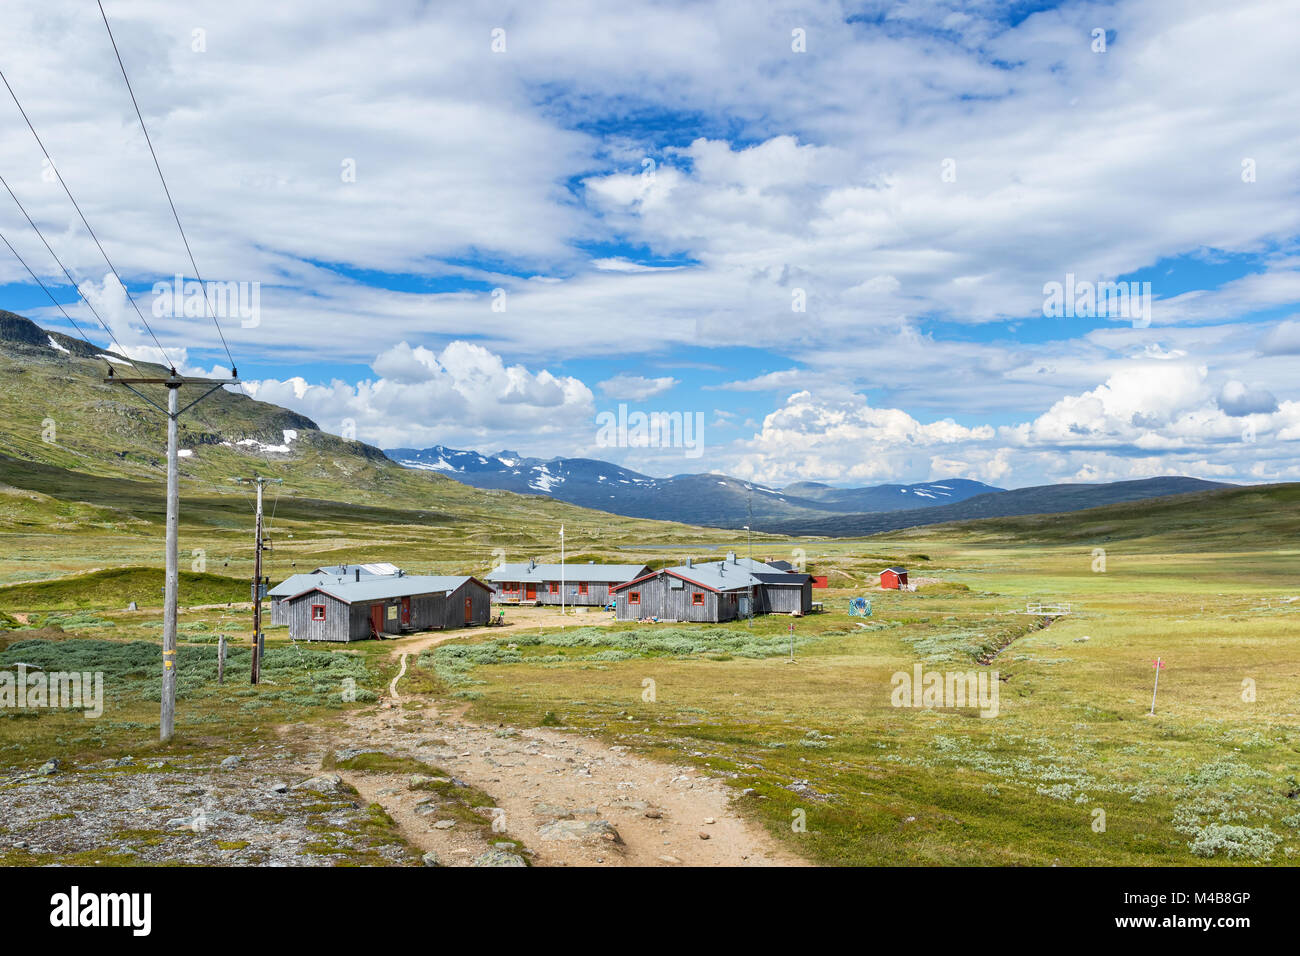 Helags mountain station in the Swedish mountains Stock Photo